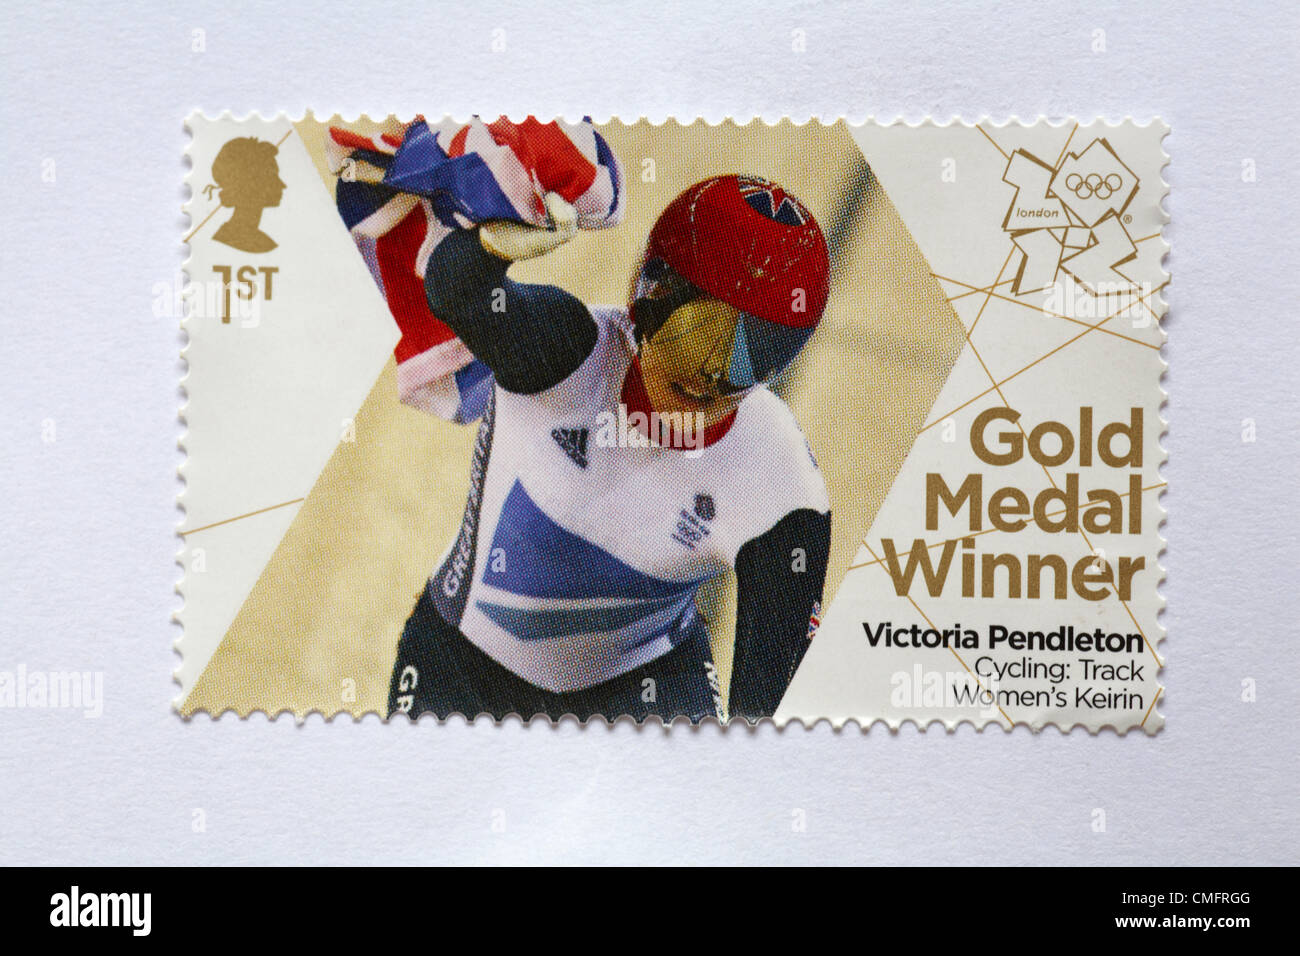 UK Saturday 4 August 2012. Stamp to honour gold medal winner Victoria Pendleton in the Cycling Track Women's Keirin event. Stamp purchased and stuck on white to send to Olympic supporter. Stock Photo